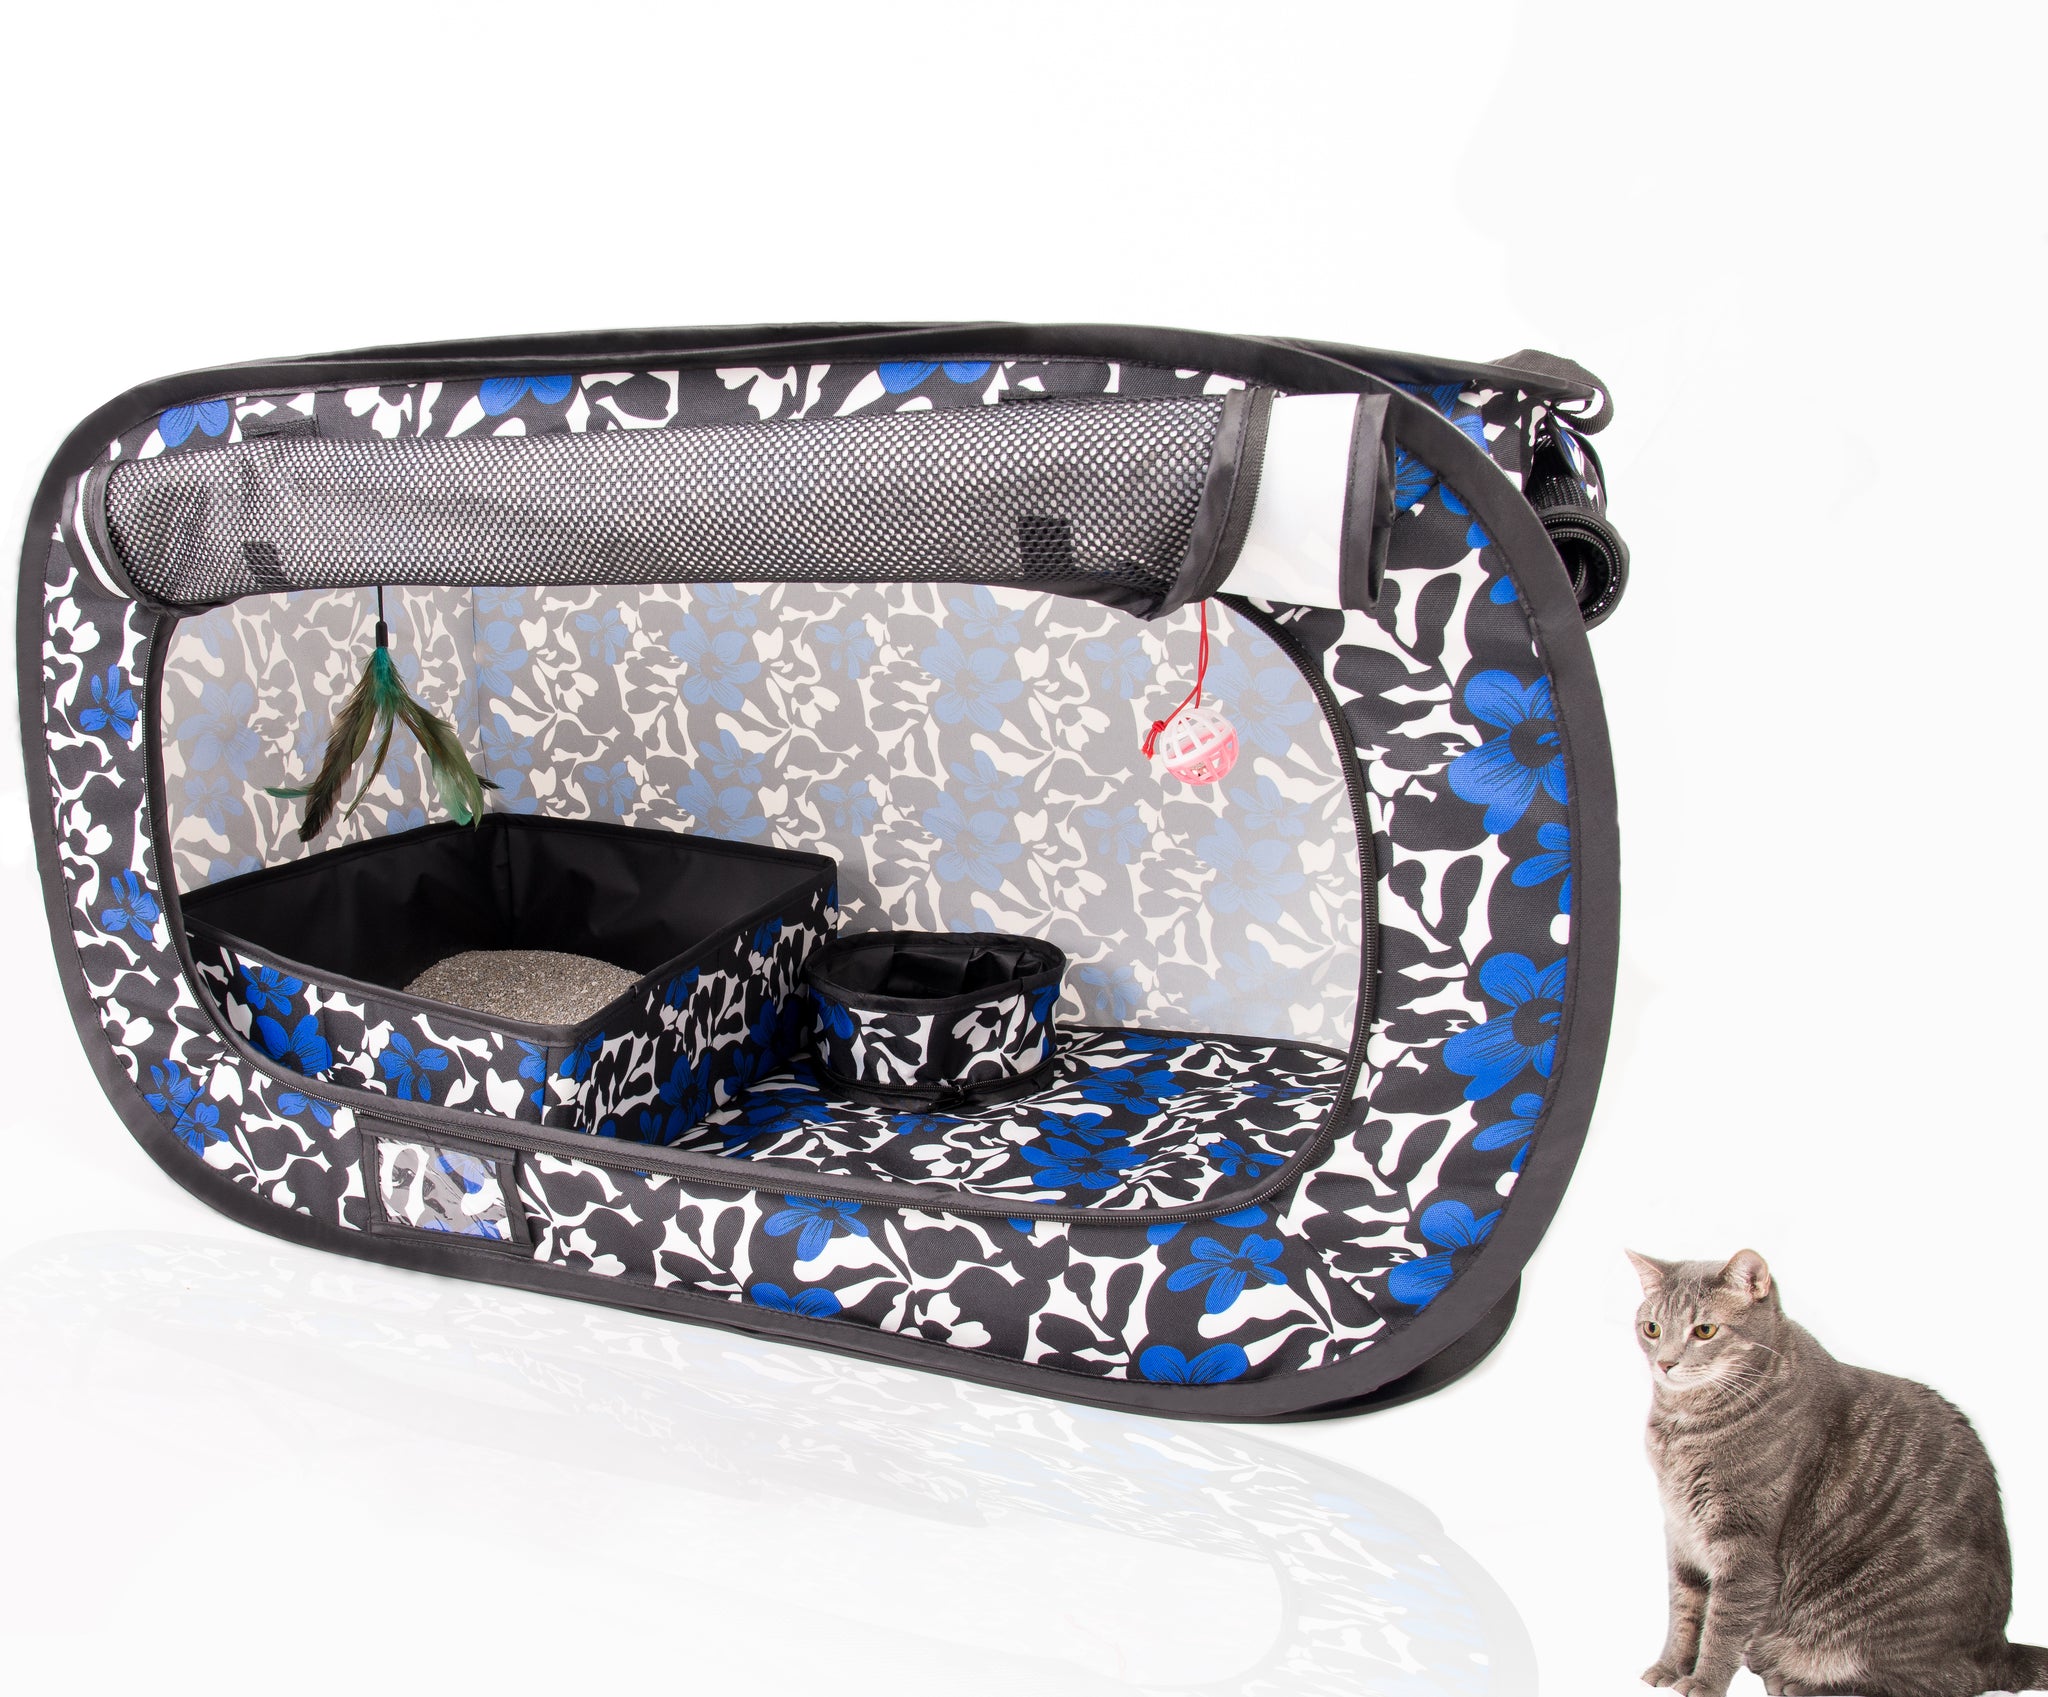 cat carrier with litter box